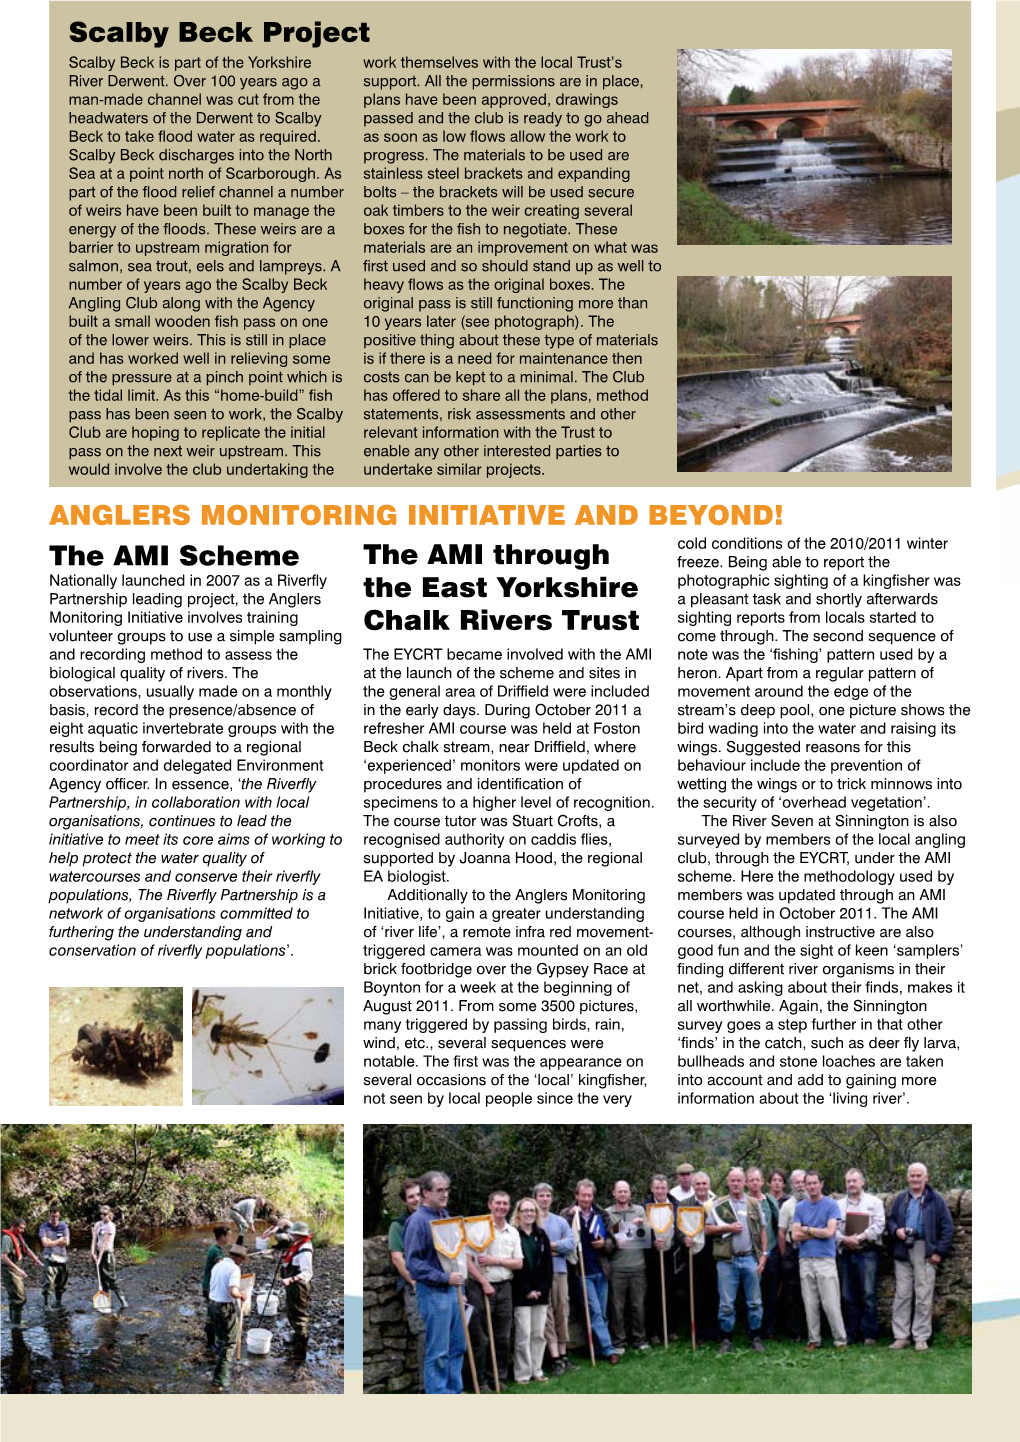 Scalby Beck Project the AMI Scheme Anglers Monitoring Initiative and Beyond!